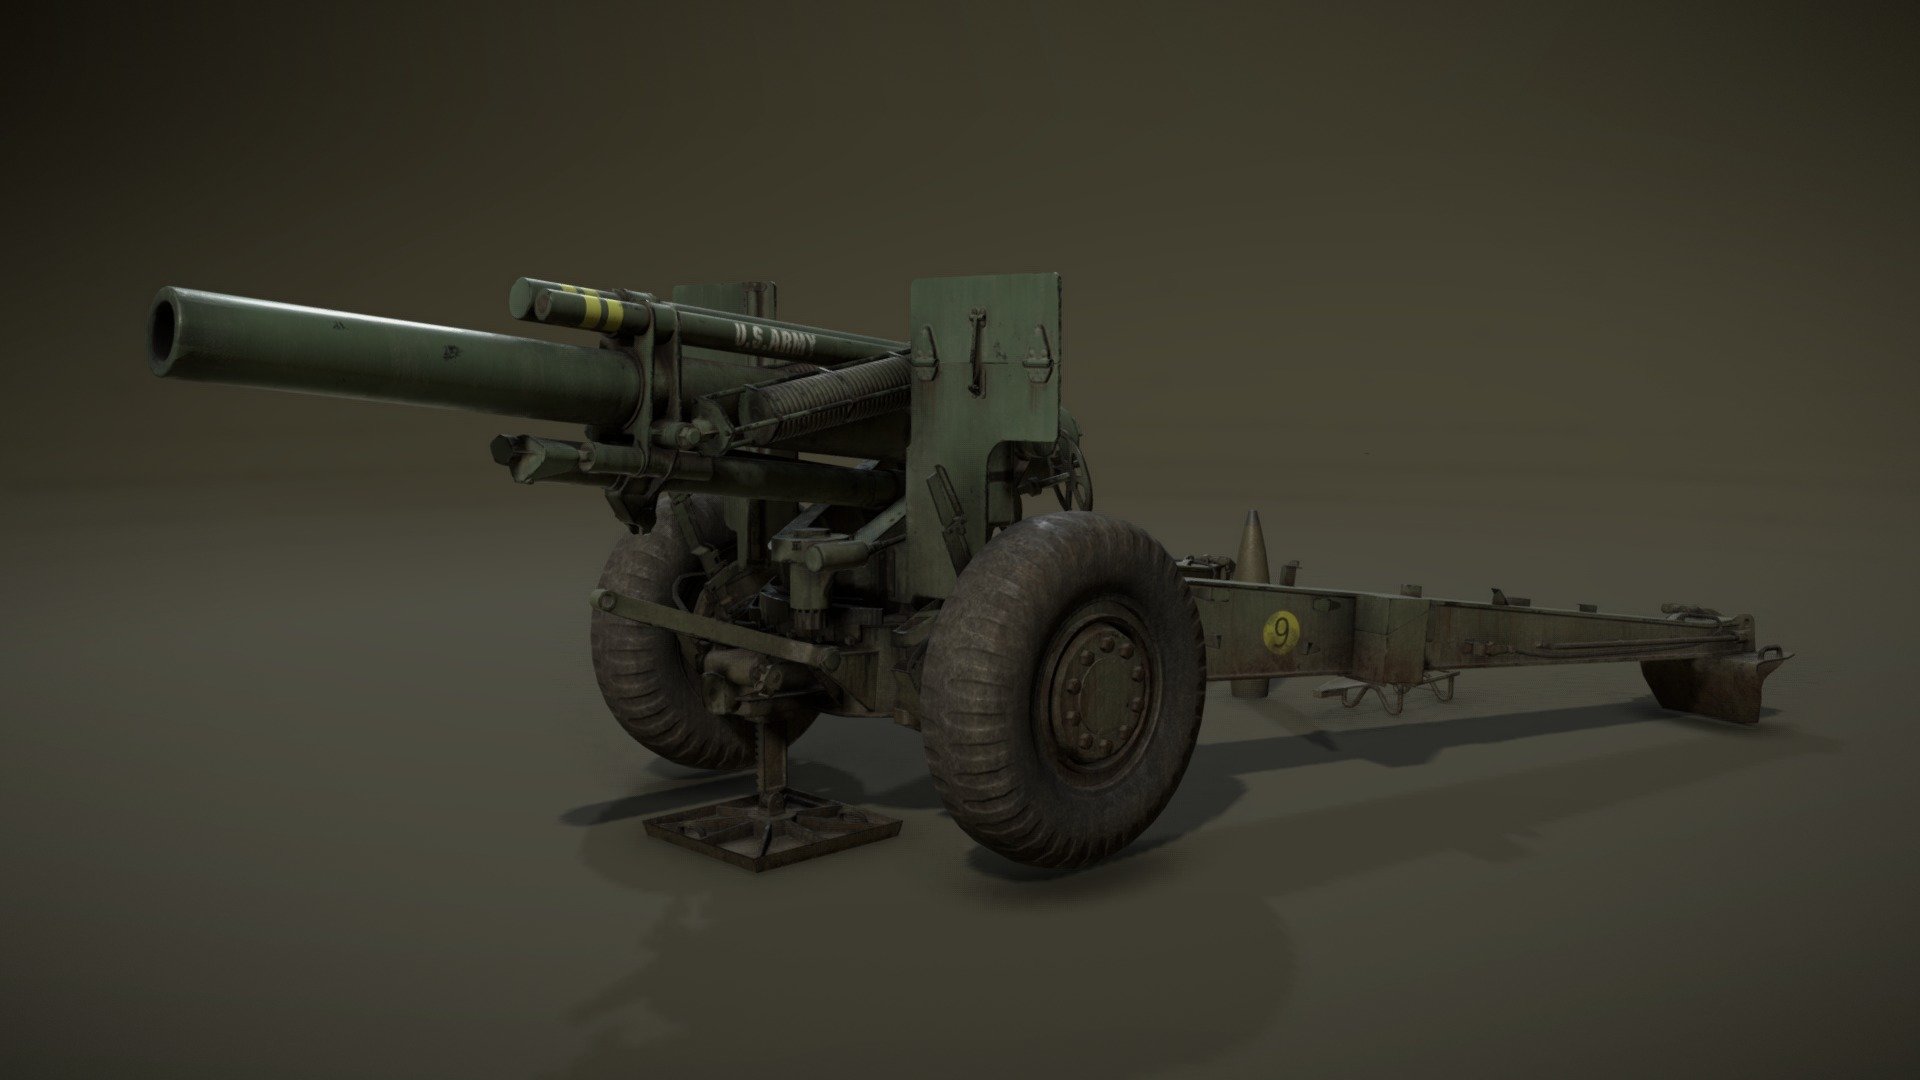 This is a model for featured game called Hell Let Loose. See more: https://www.hellletloose.com 
There was a free base model, so I fully remodeled it, made sculpting and texturing. Cannon consist of 37400 tris 3d model